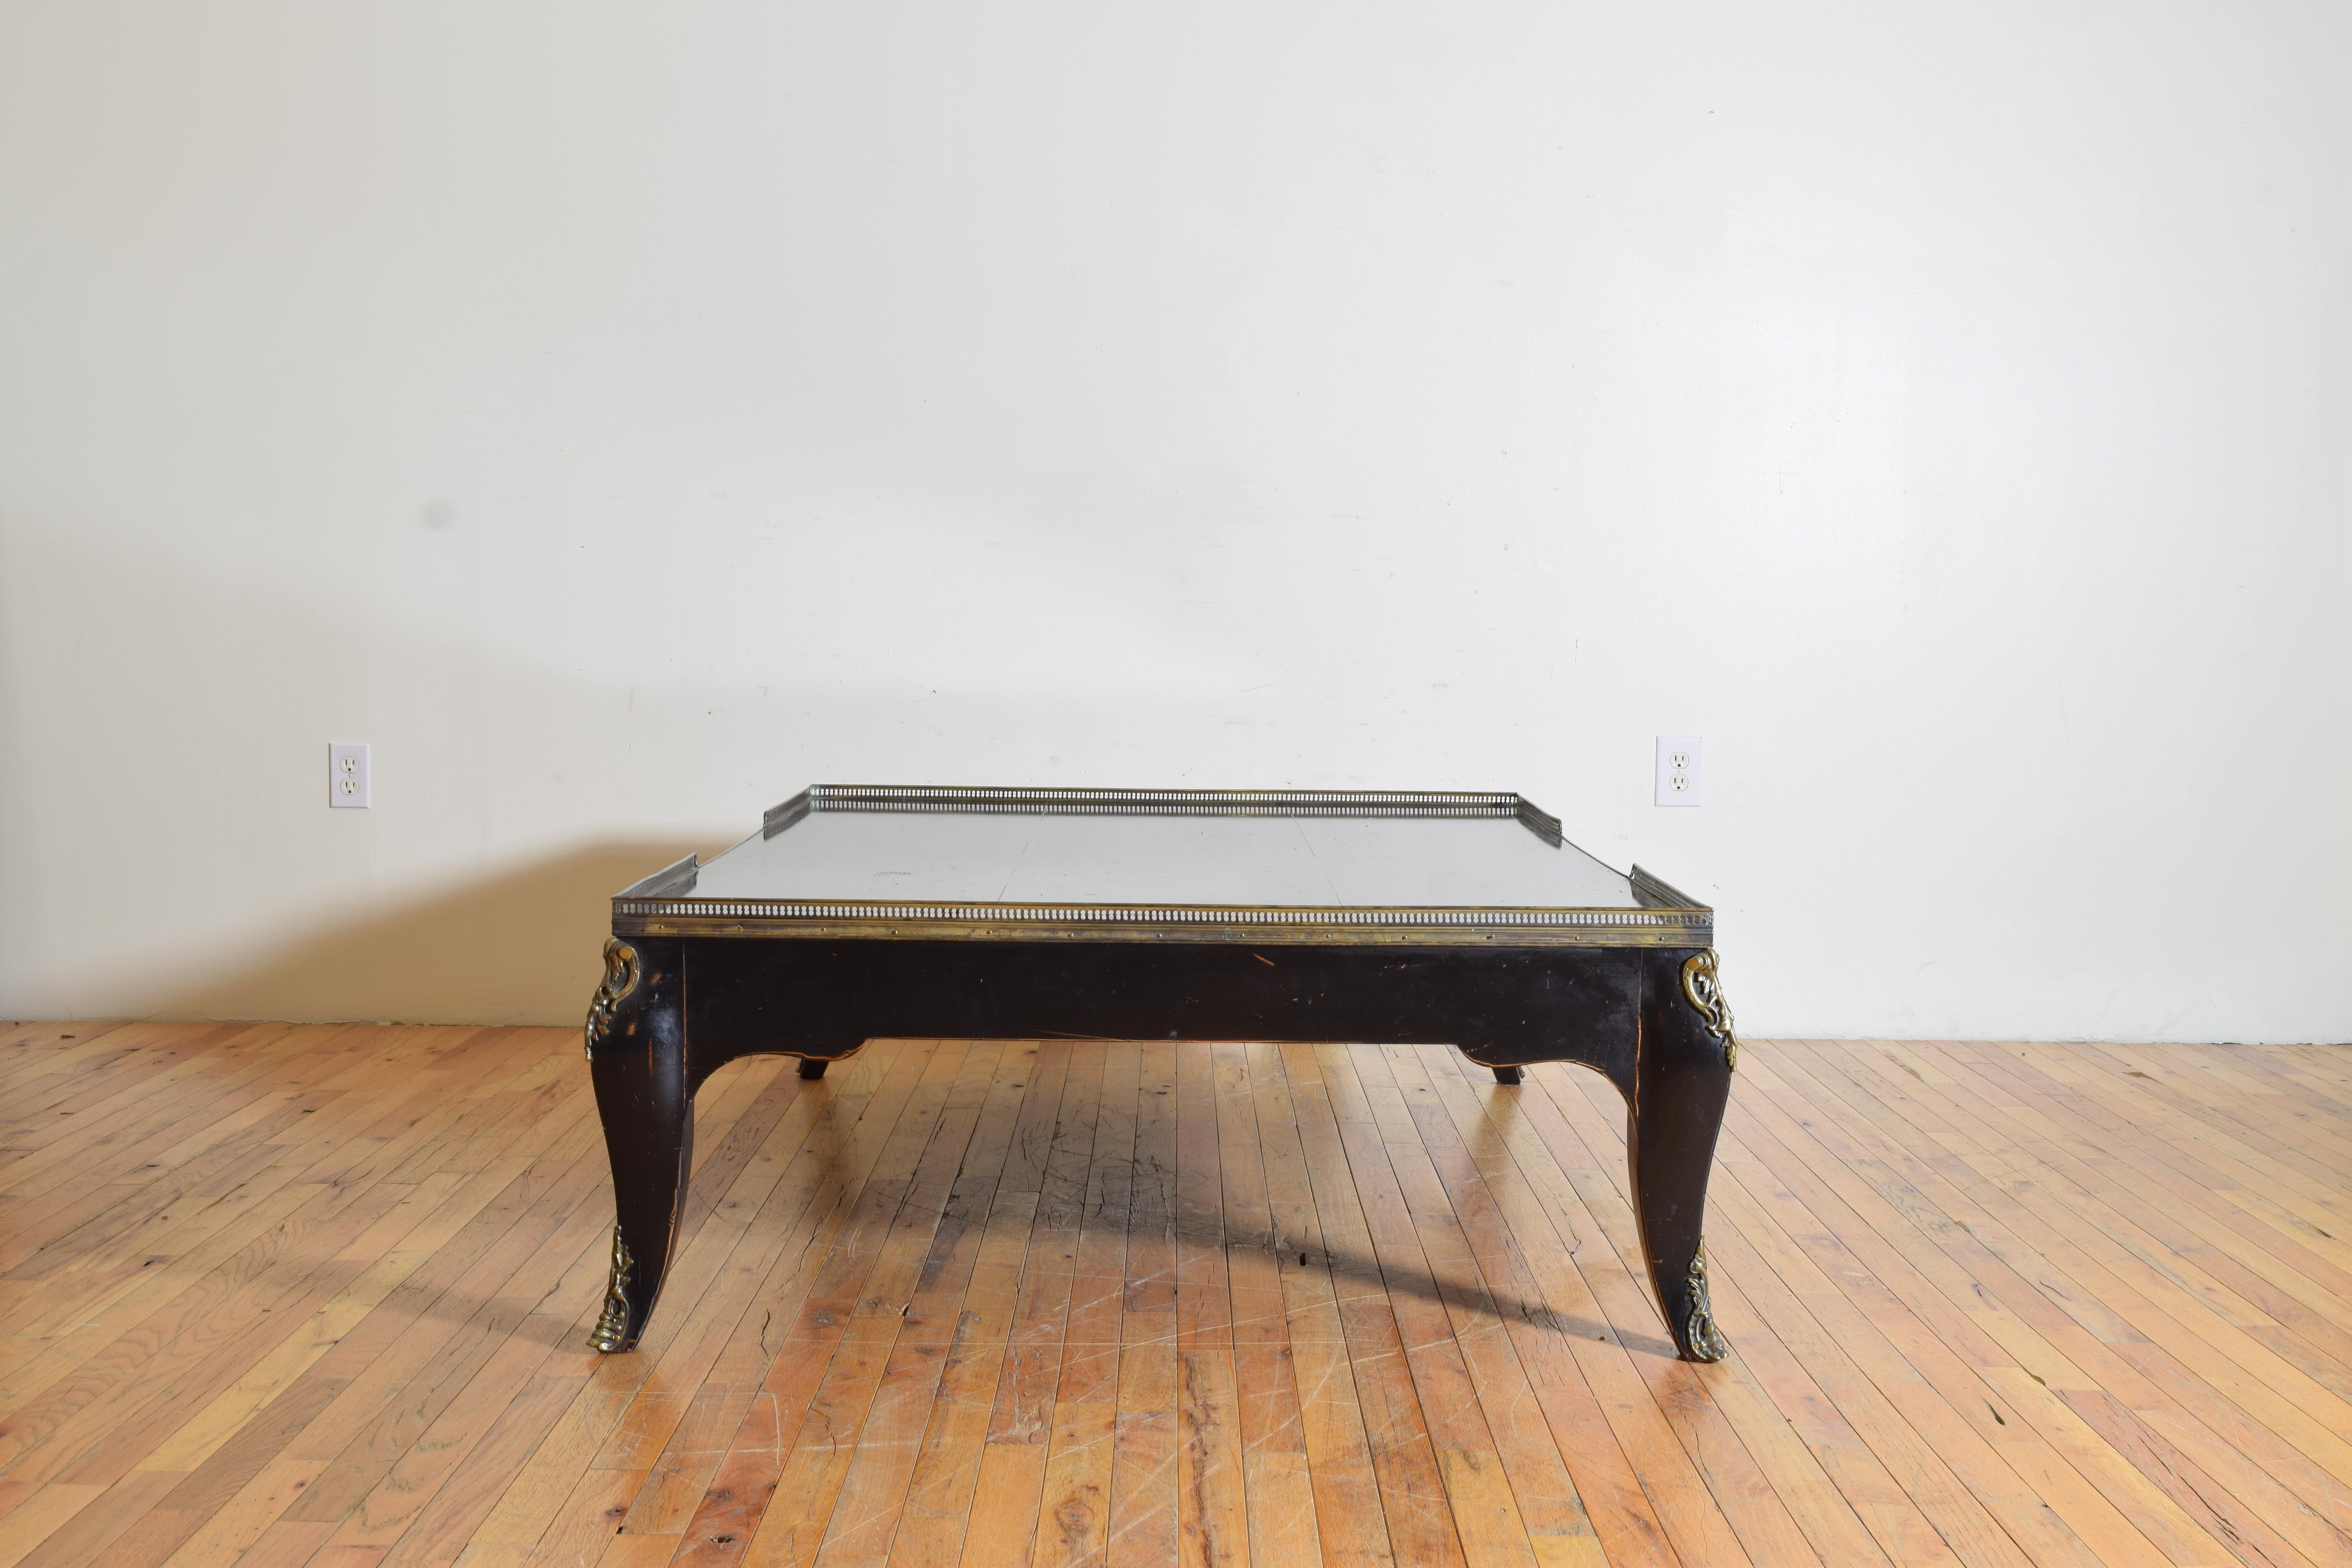 20th Century French Louis XV Style Ebonized & Brass Mounted Large Coffee Table, mid 20th cen.